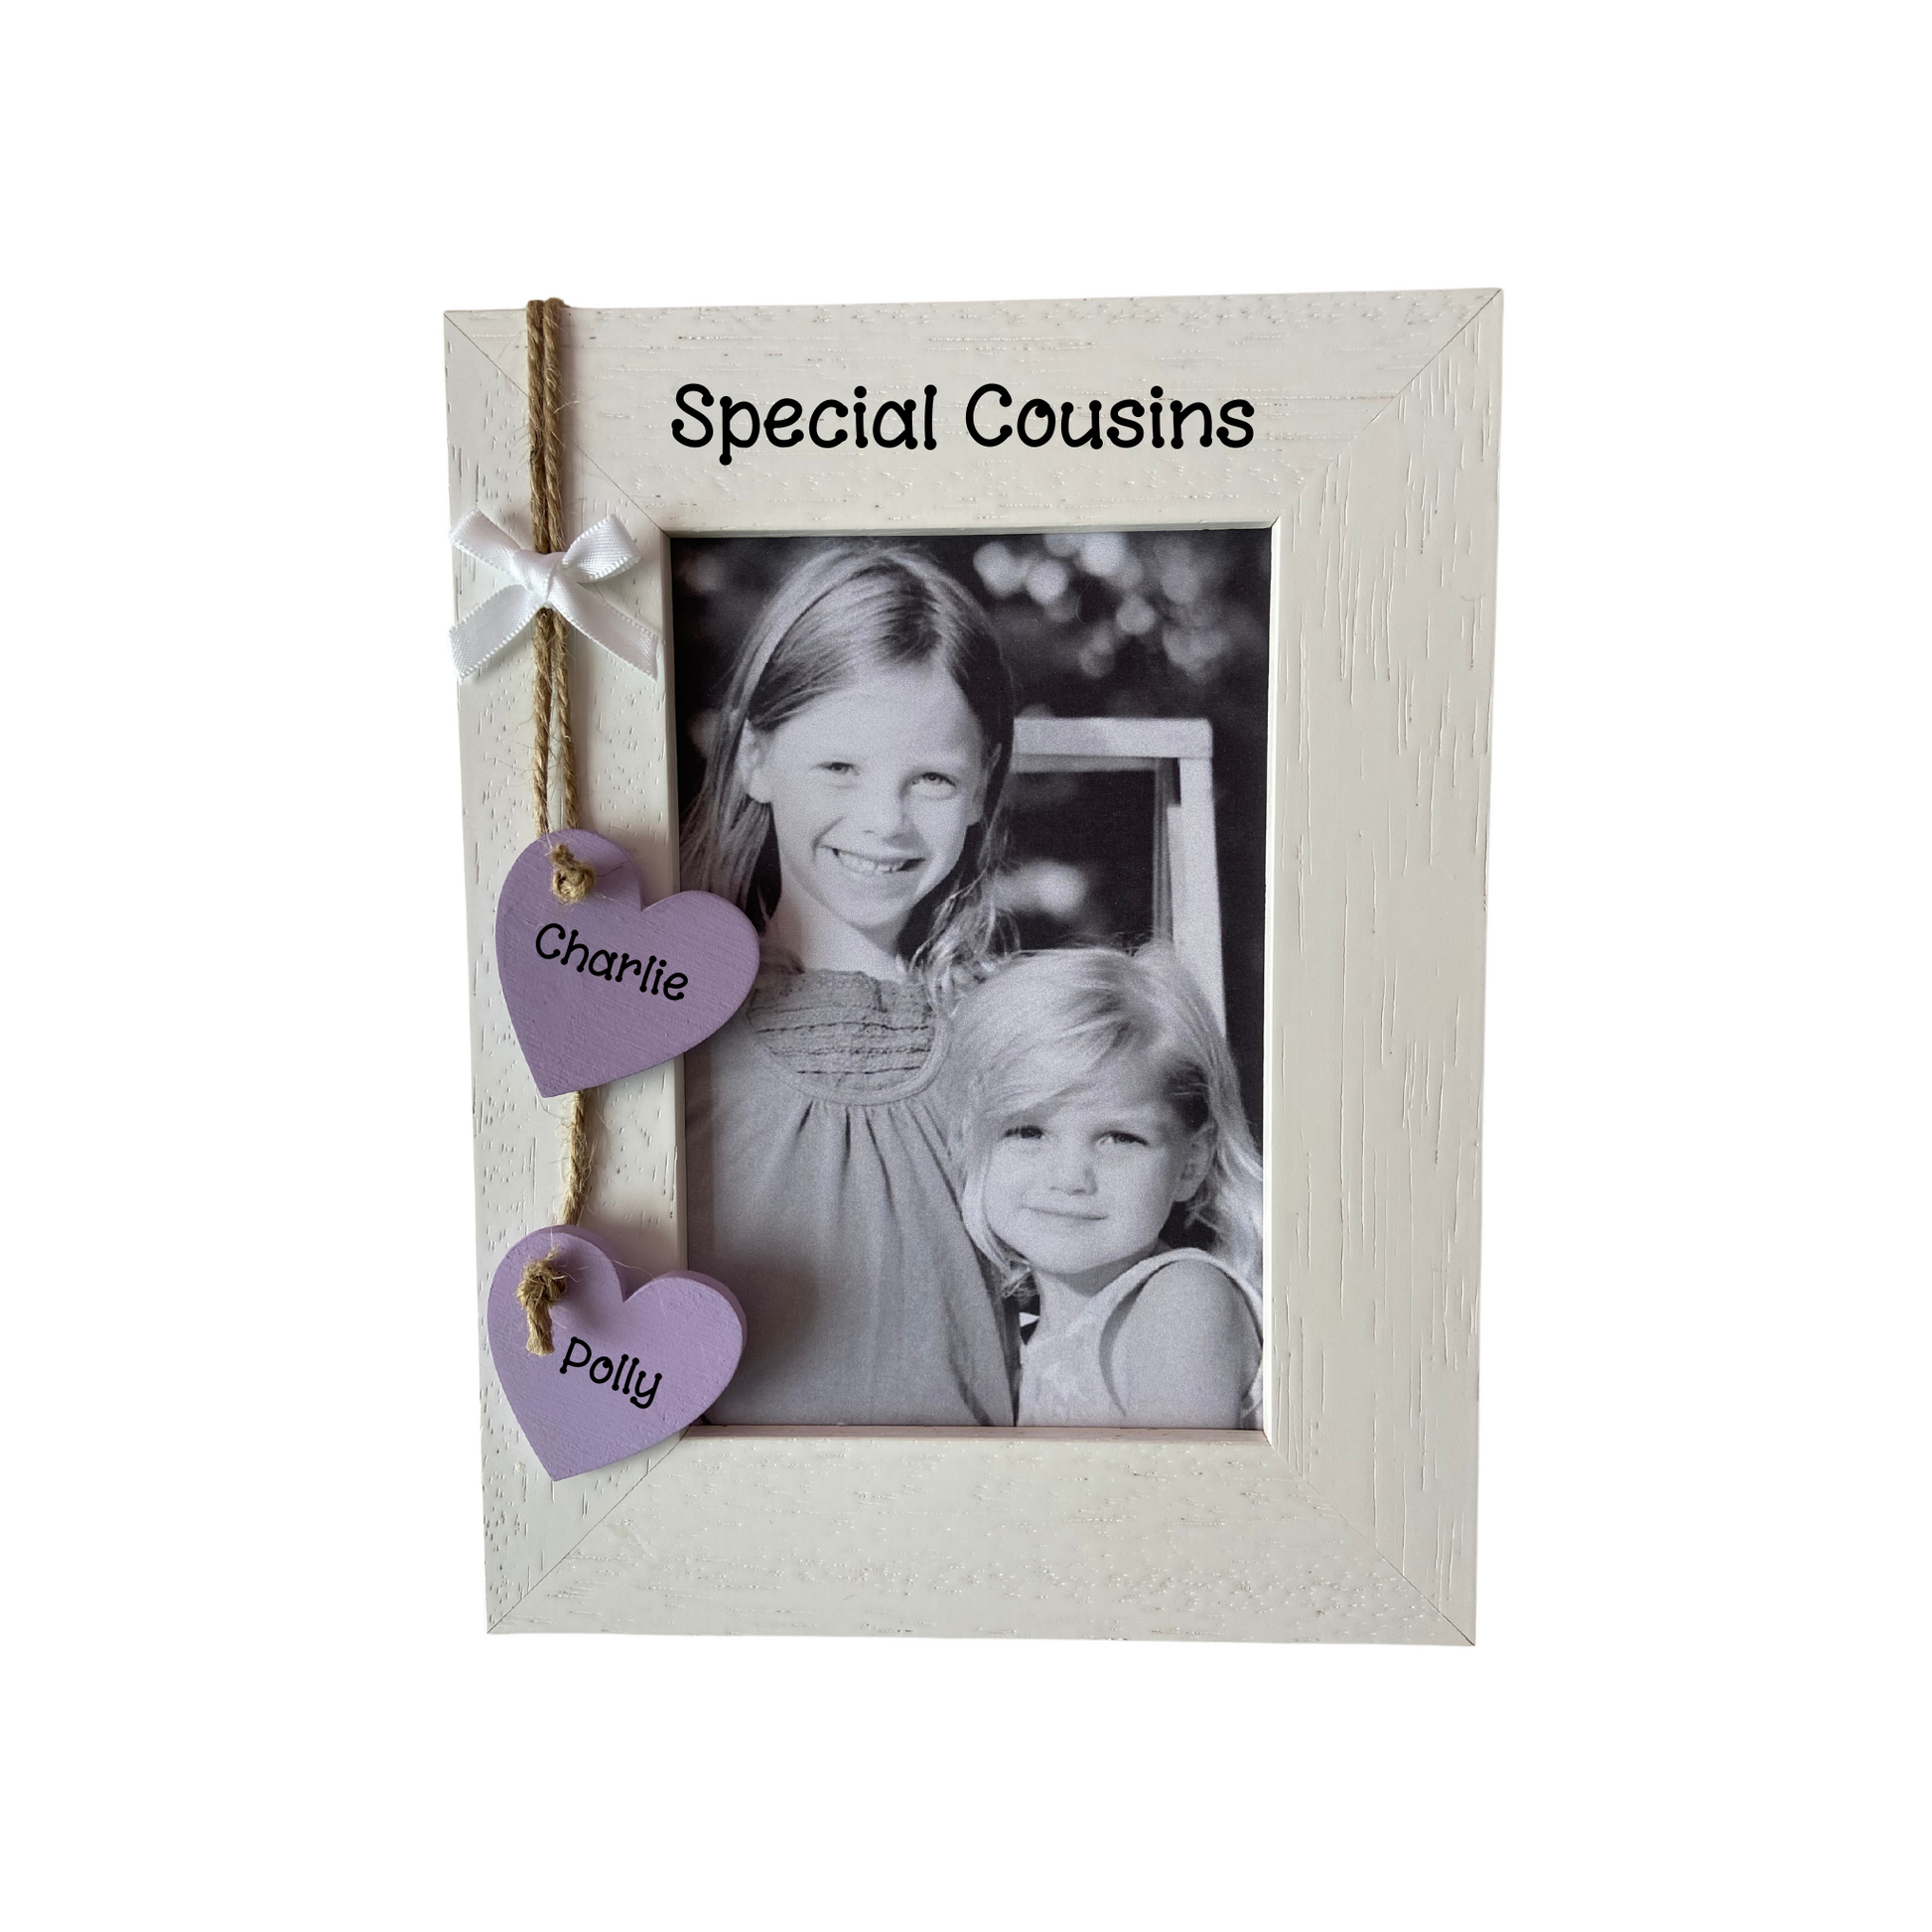 Image shows a special cousins photo frame, including two hanging hearts with the names of cousins, also a white bow sat above and bling if wanted.